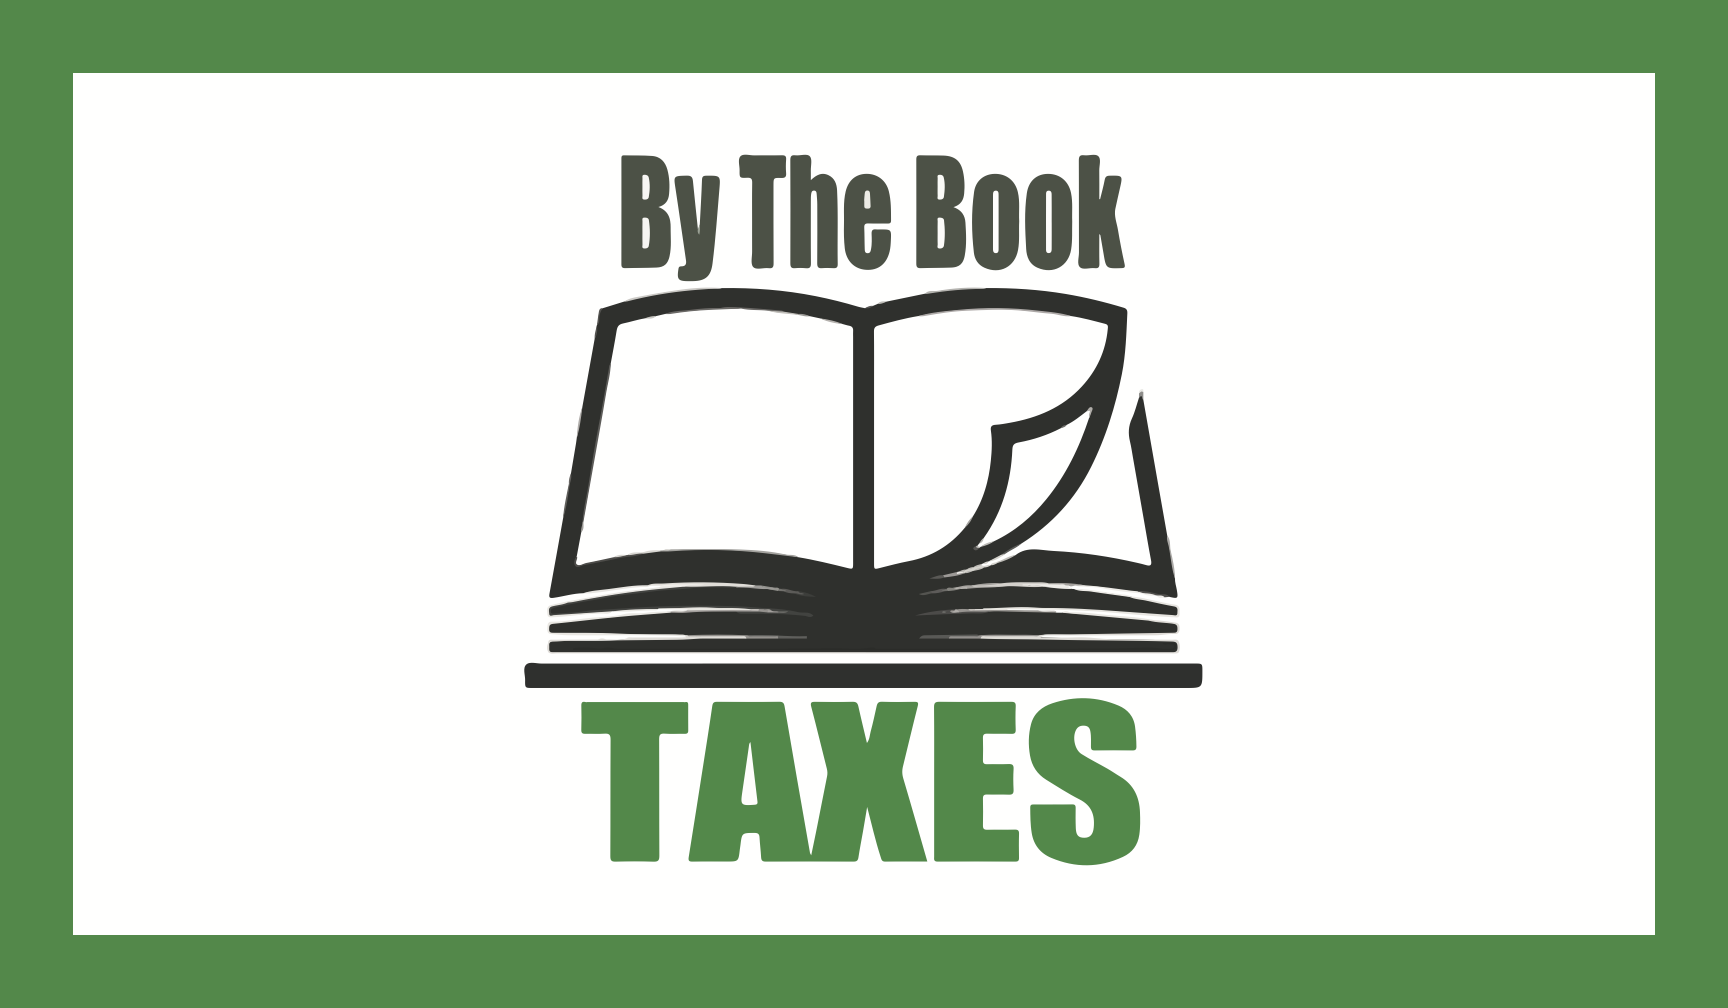 By The Book Taxes